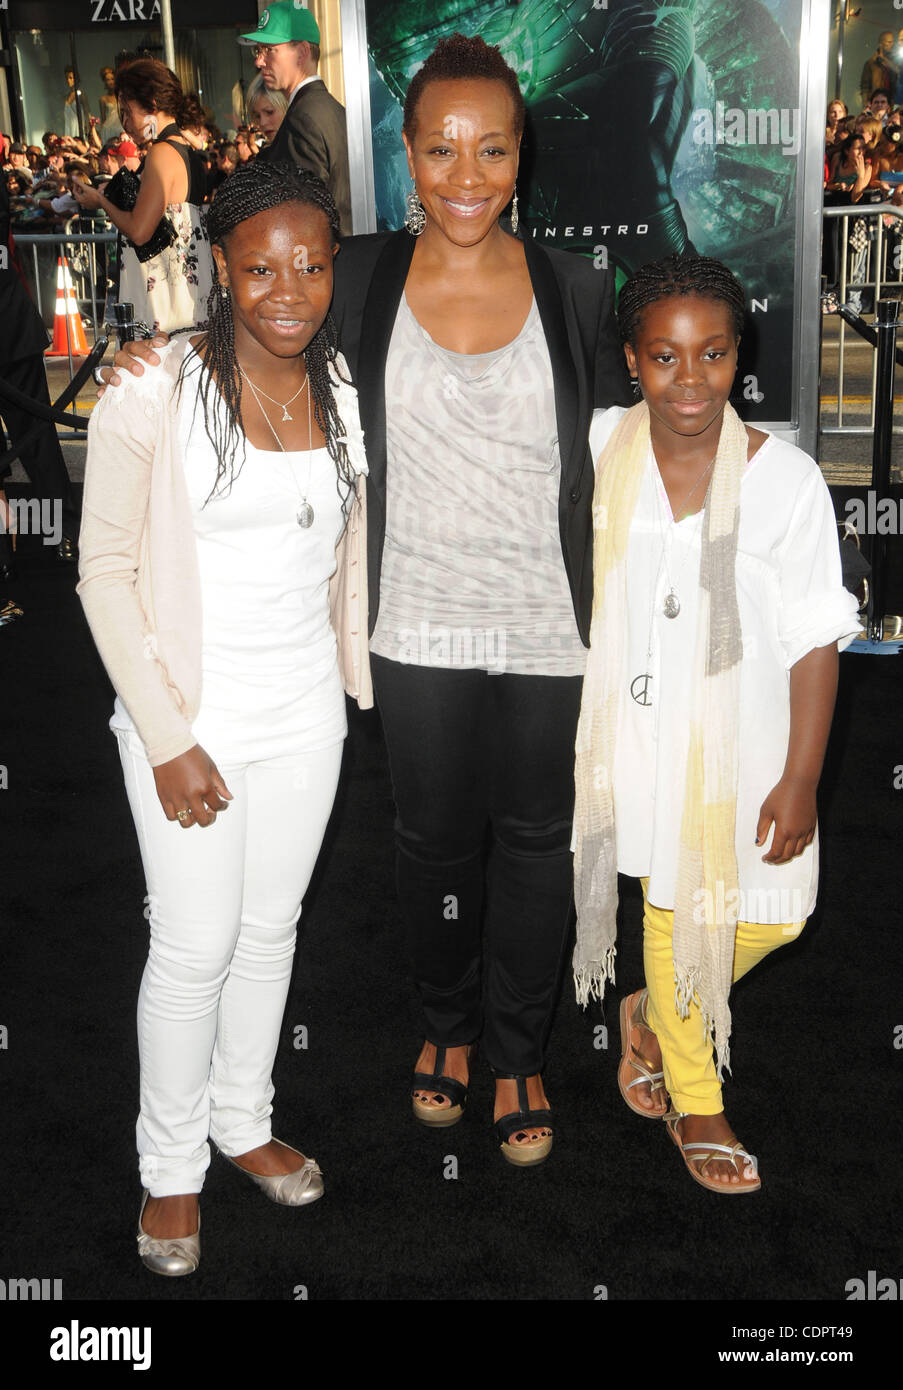 June 15, 2011 - Los Angeles, California, U.S. - Marianne Jean Baptiste  Attending The Los Angeles Premiere Of ''Green Lantern'' Held At The  Grauman's Chinese Theatre In Hollywood, California On 6/15/11. 2011(Credit